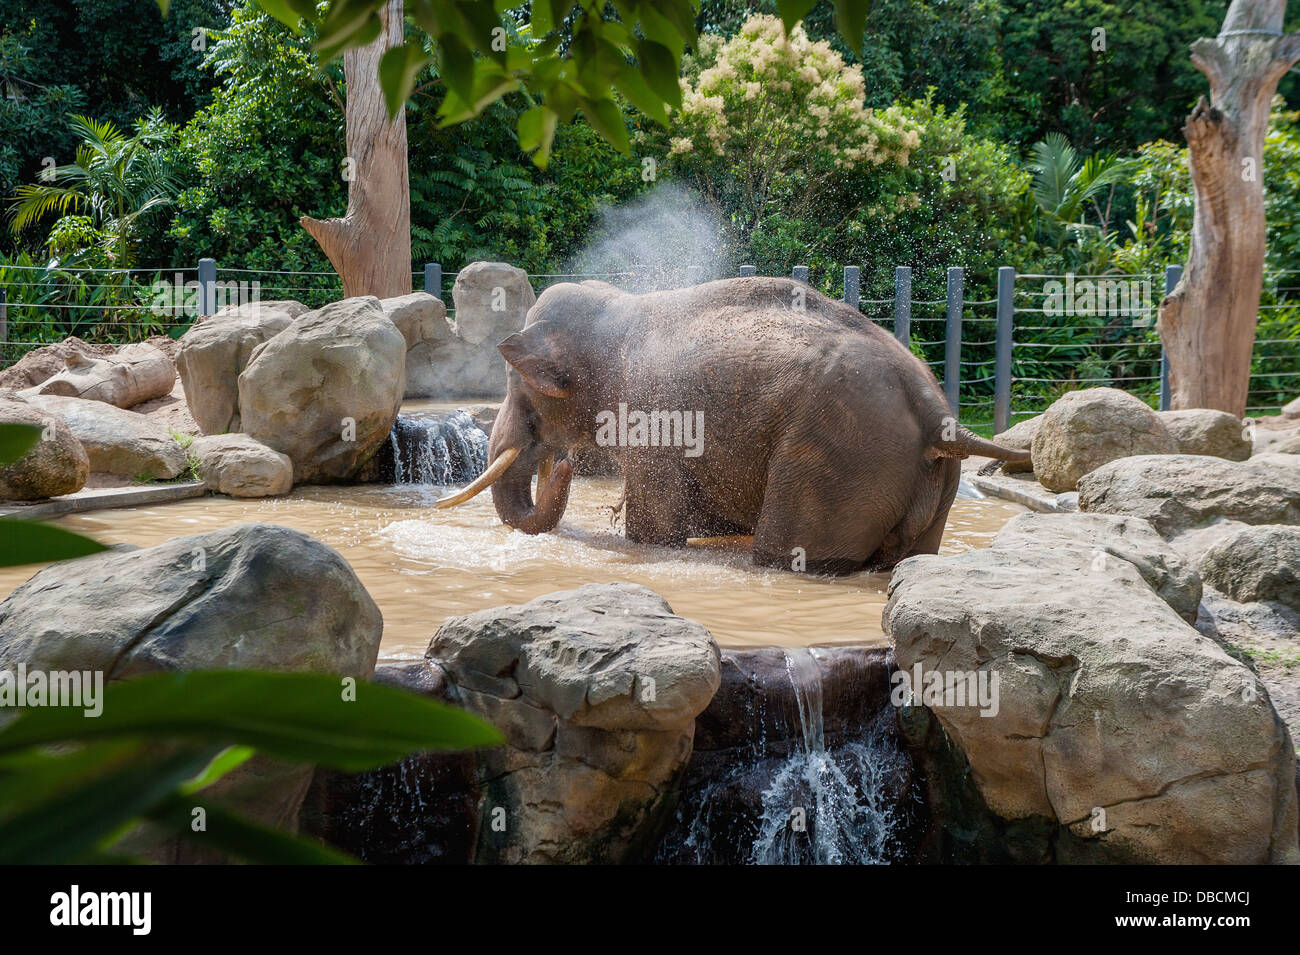 A male African elephant having a bath and shower at an Australian Zoo Stock Photo